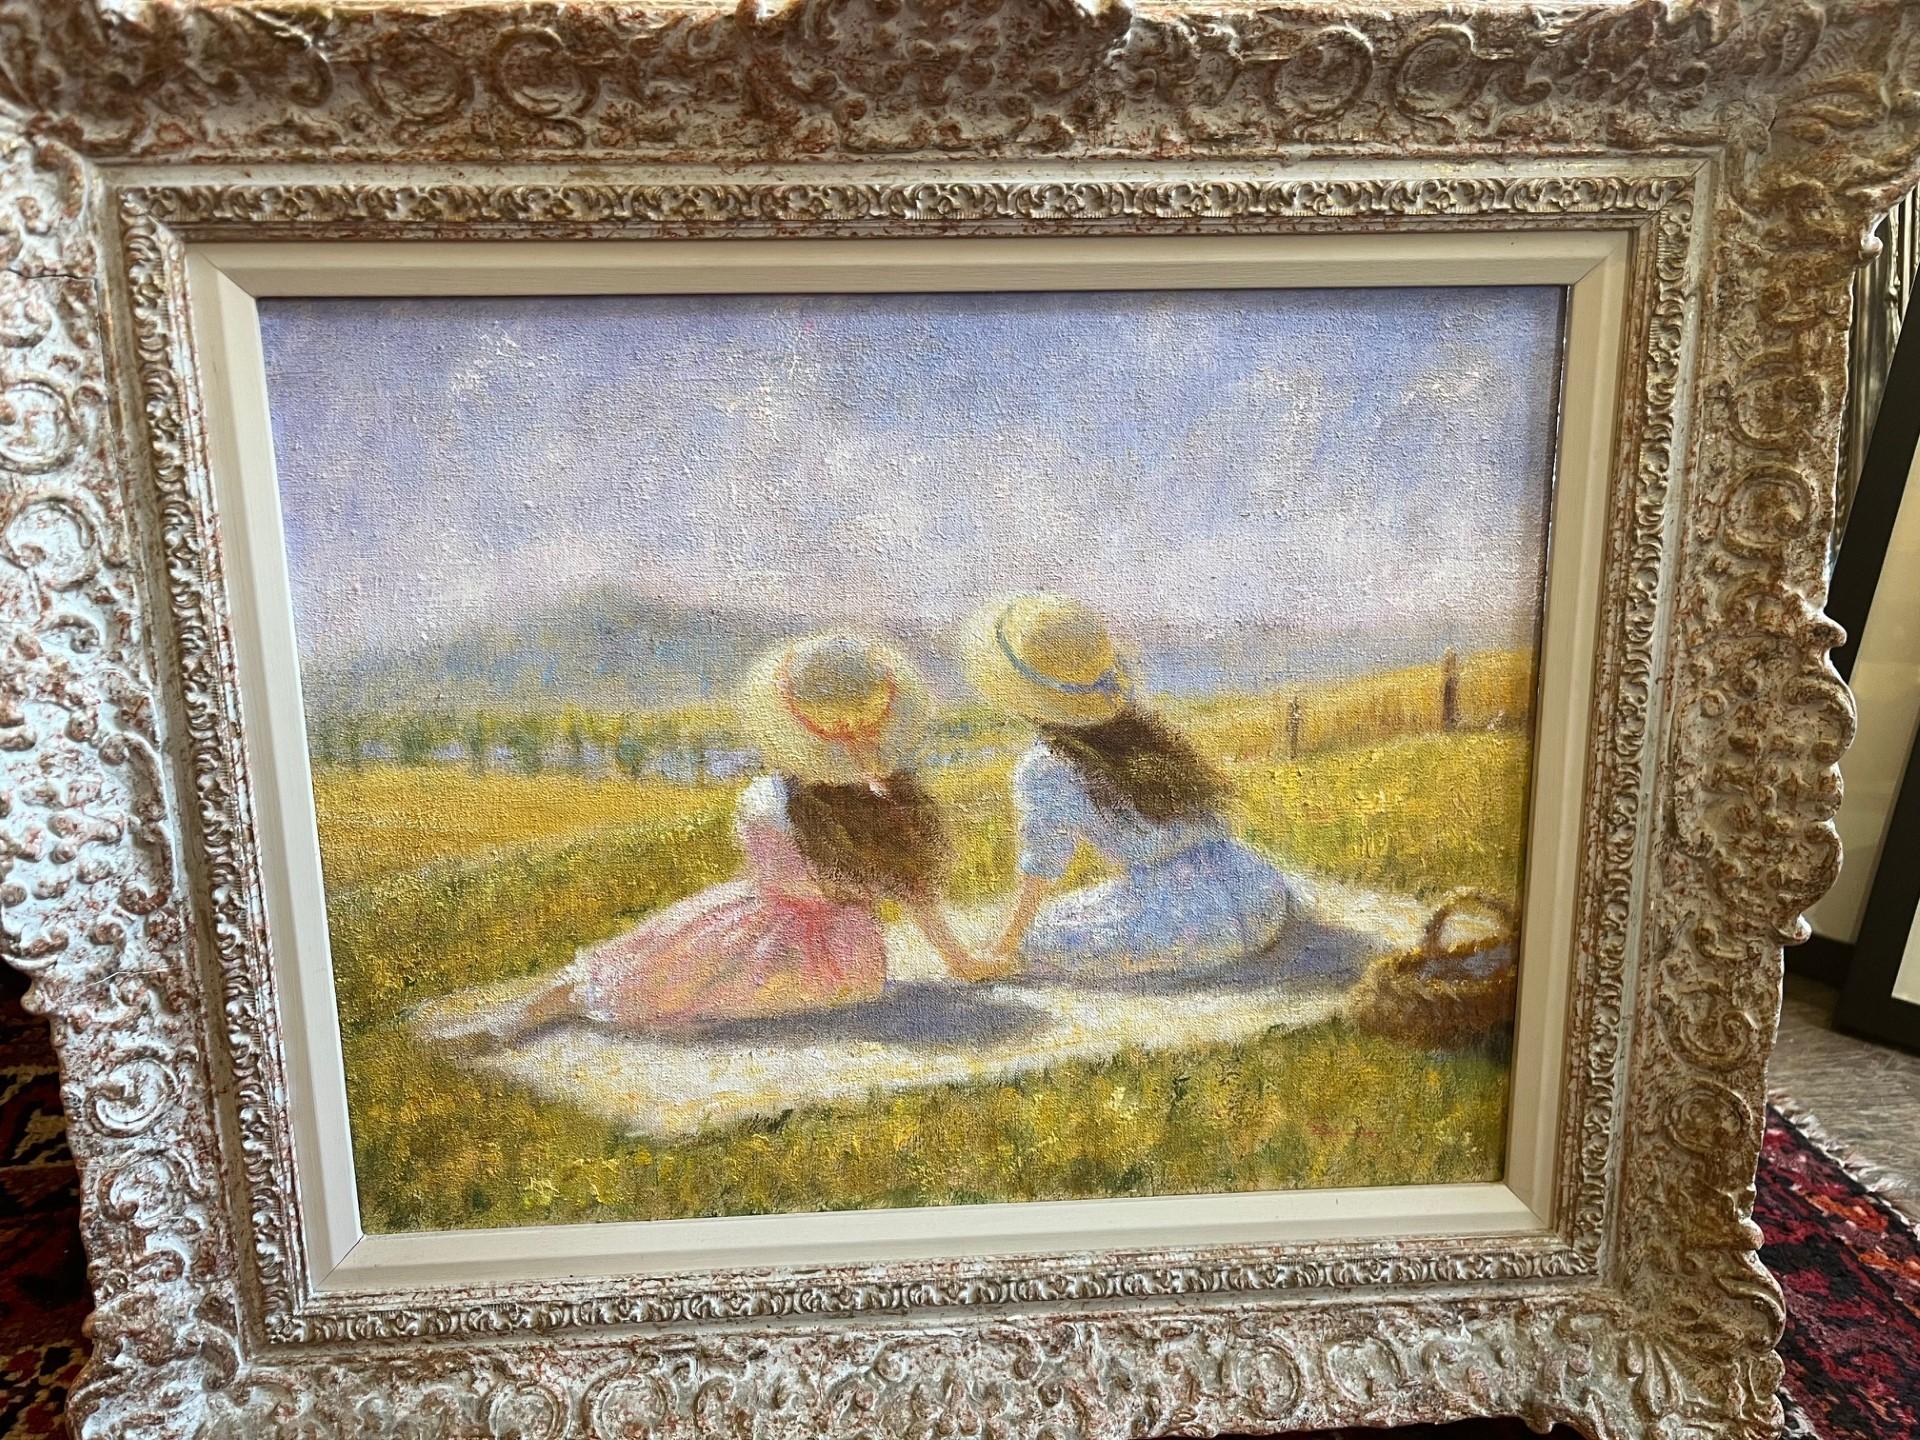 2 girls on picnic in meadow towards Clee Hill, Shrops.impressionist oil painting - Post-Impressionist Art by Rene Jerome Legrand